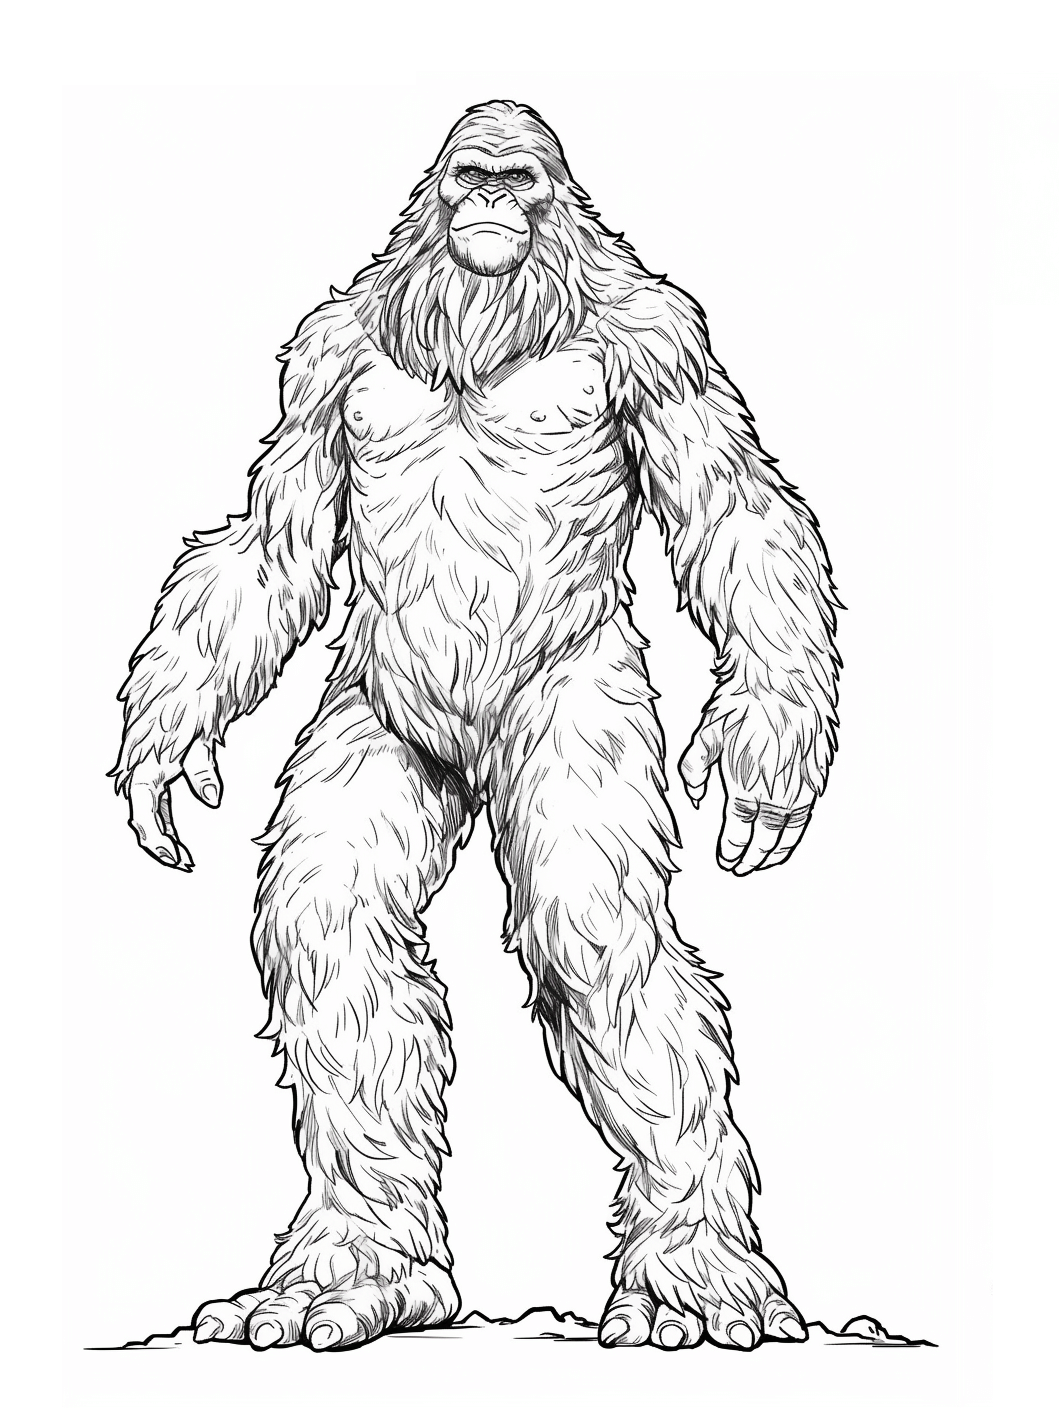 Bigfoot Sasquatch Coloring Pages Sketch Coloring Page